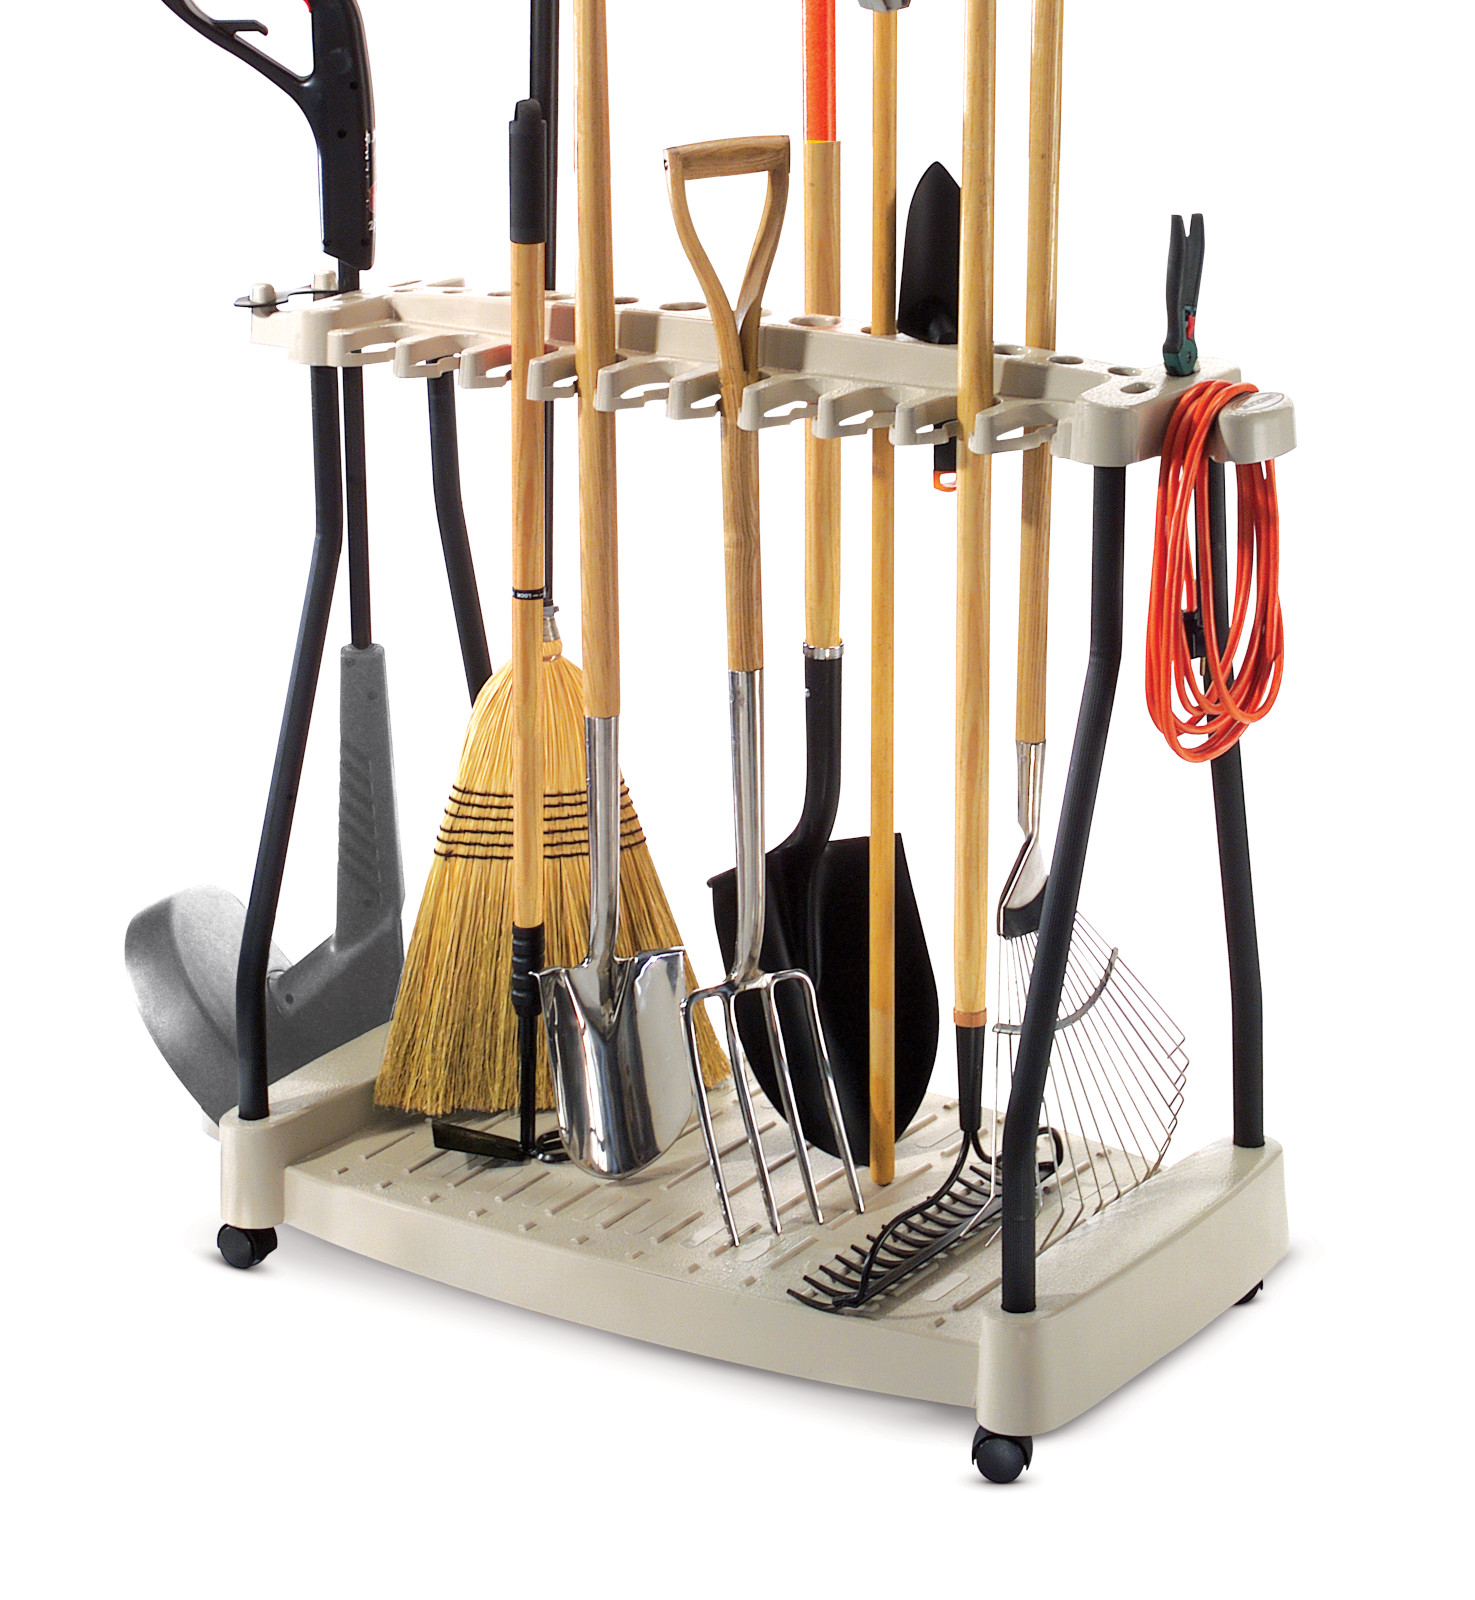 Suncast Lawn and Garden Steel Tool Storage Rack with Wheels for 30 Tools, Light Taupe - image 3 of 7